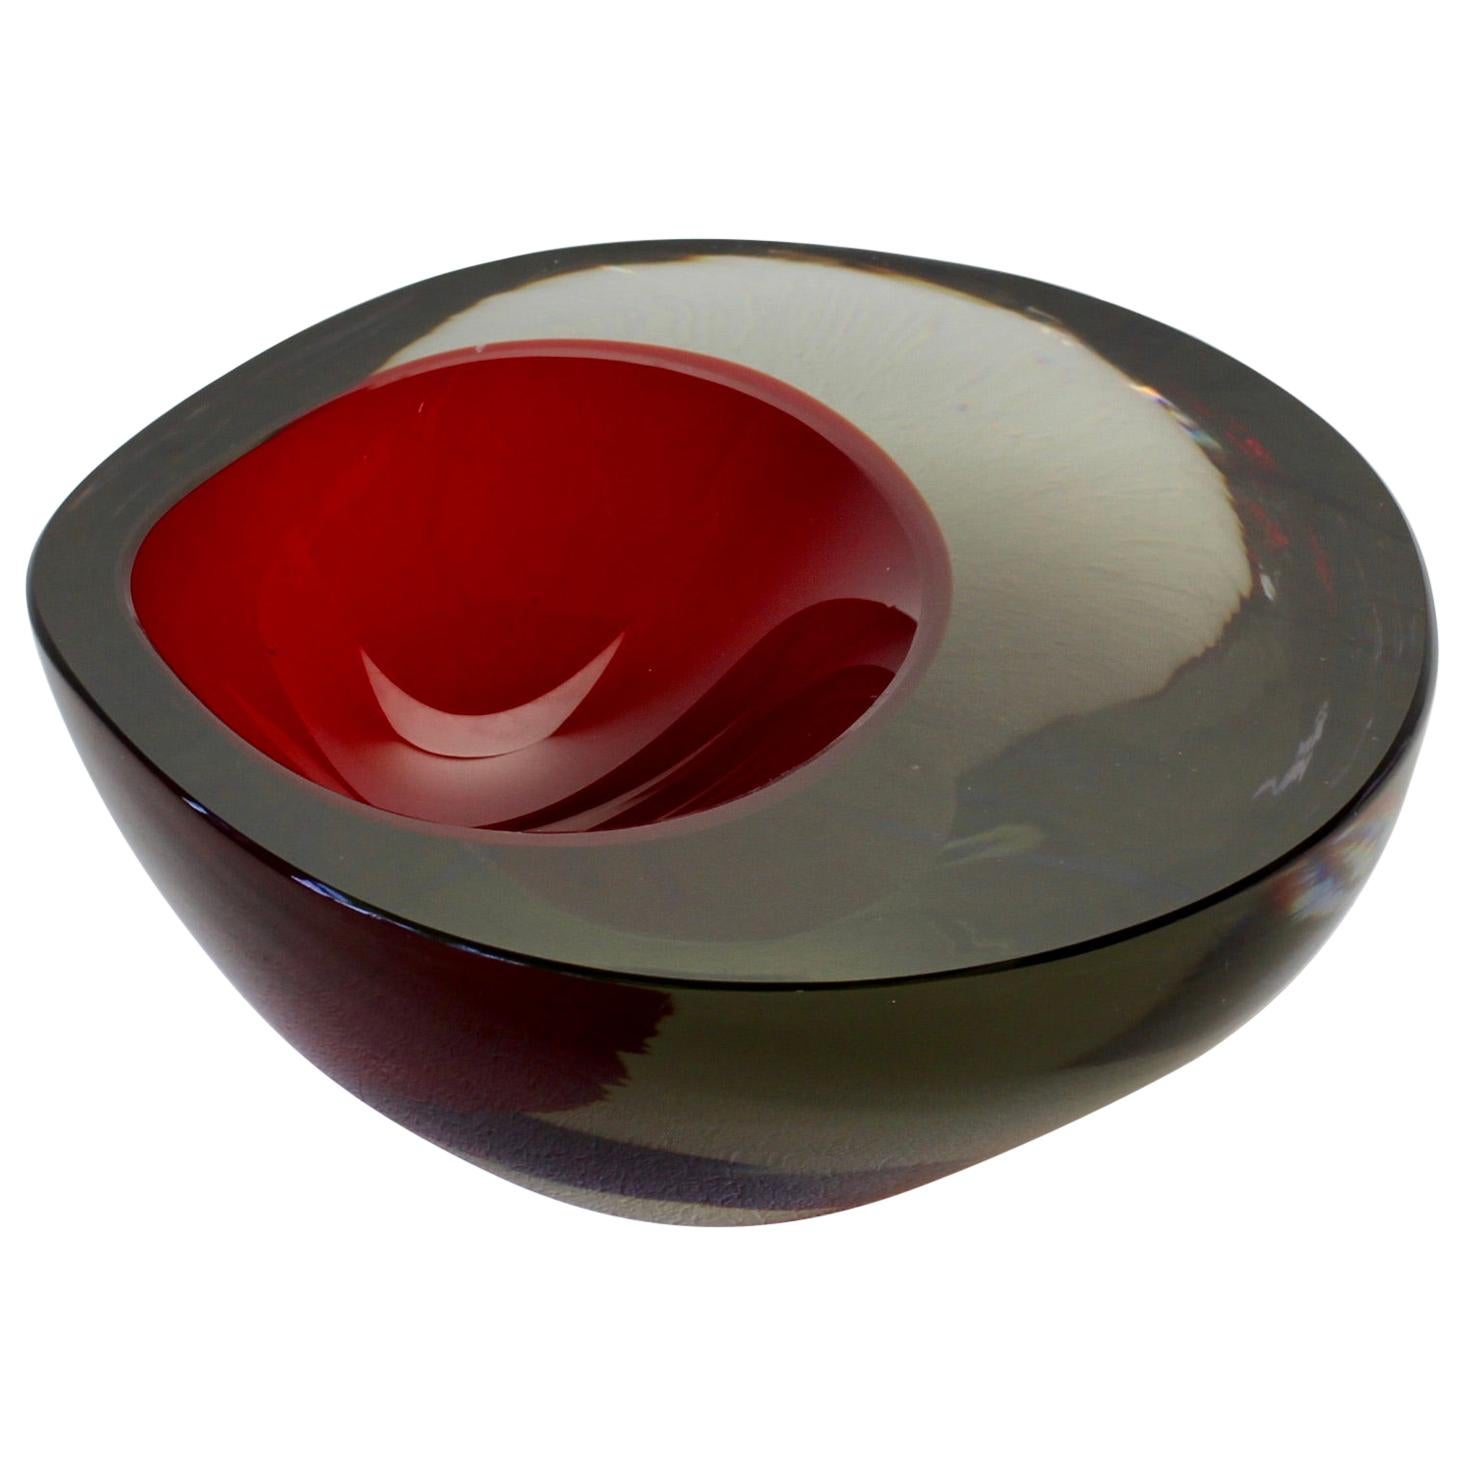 Large Cenedese Italian Asymmetric Red Sommerso Murano Glass Bowl Dish or Ashtray